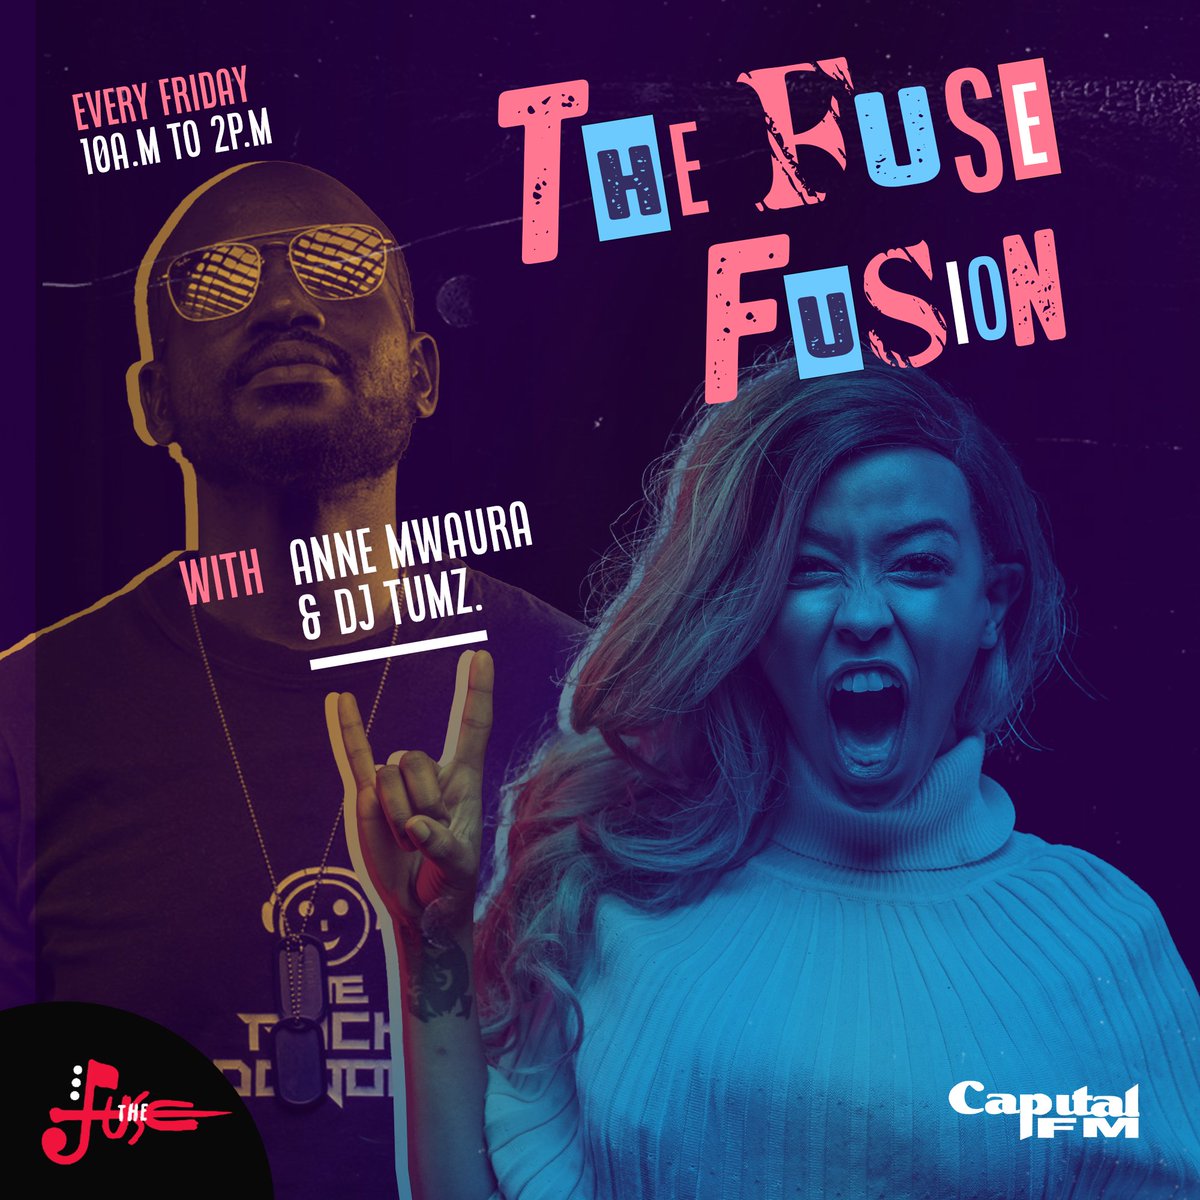 🎶Cheers to the freaking weekend, we drink to that yeah, yeah🎶 📻 🎙: radio.capitalfm.co.ke for #FuseFusion with #AnneMwaura & @DeejayTumz! #TheFuse984 #FuseFusion